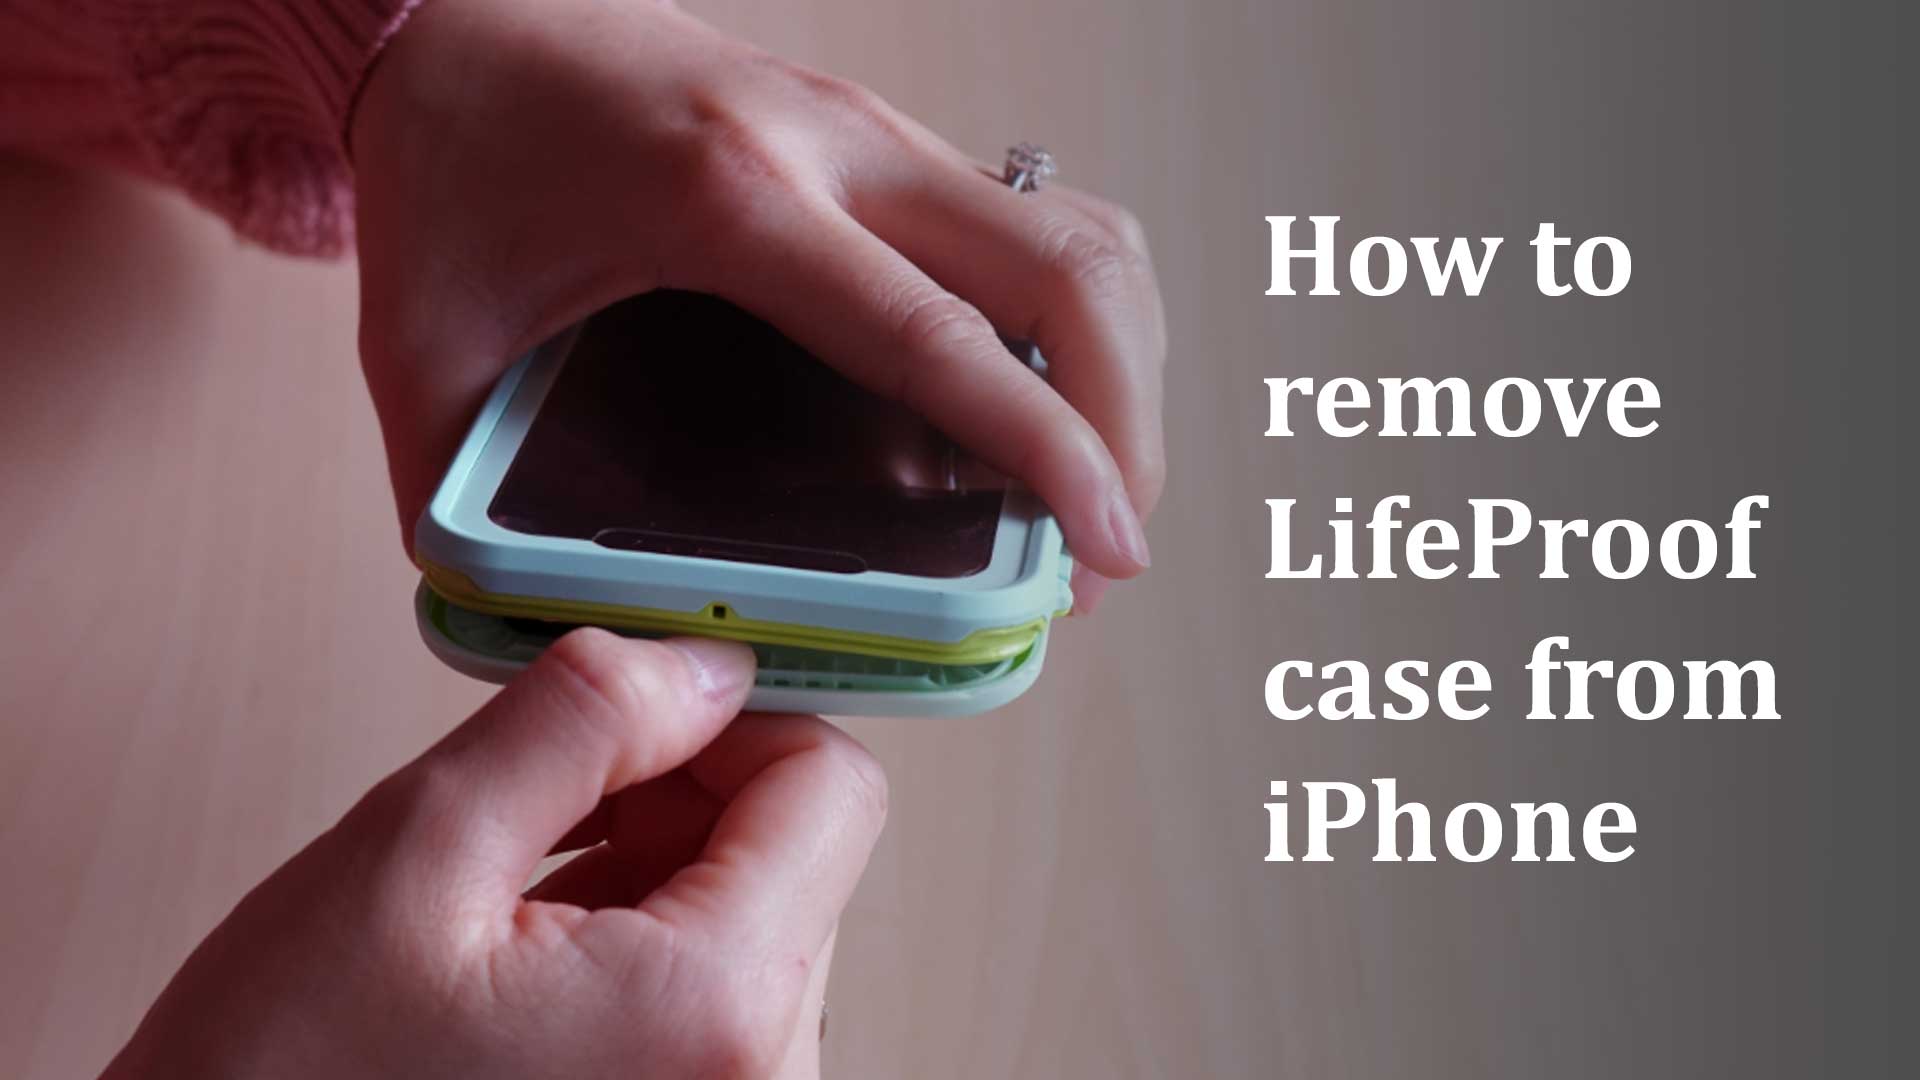 How to remove LifeProof case from iPhone